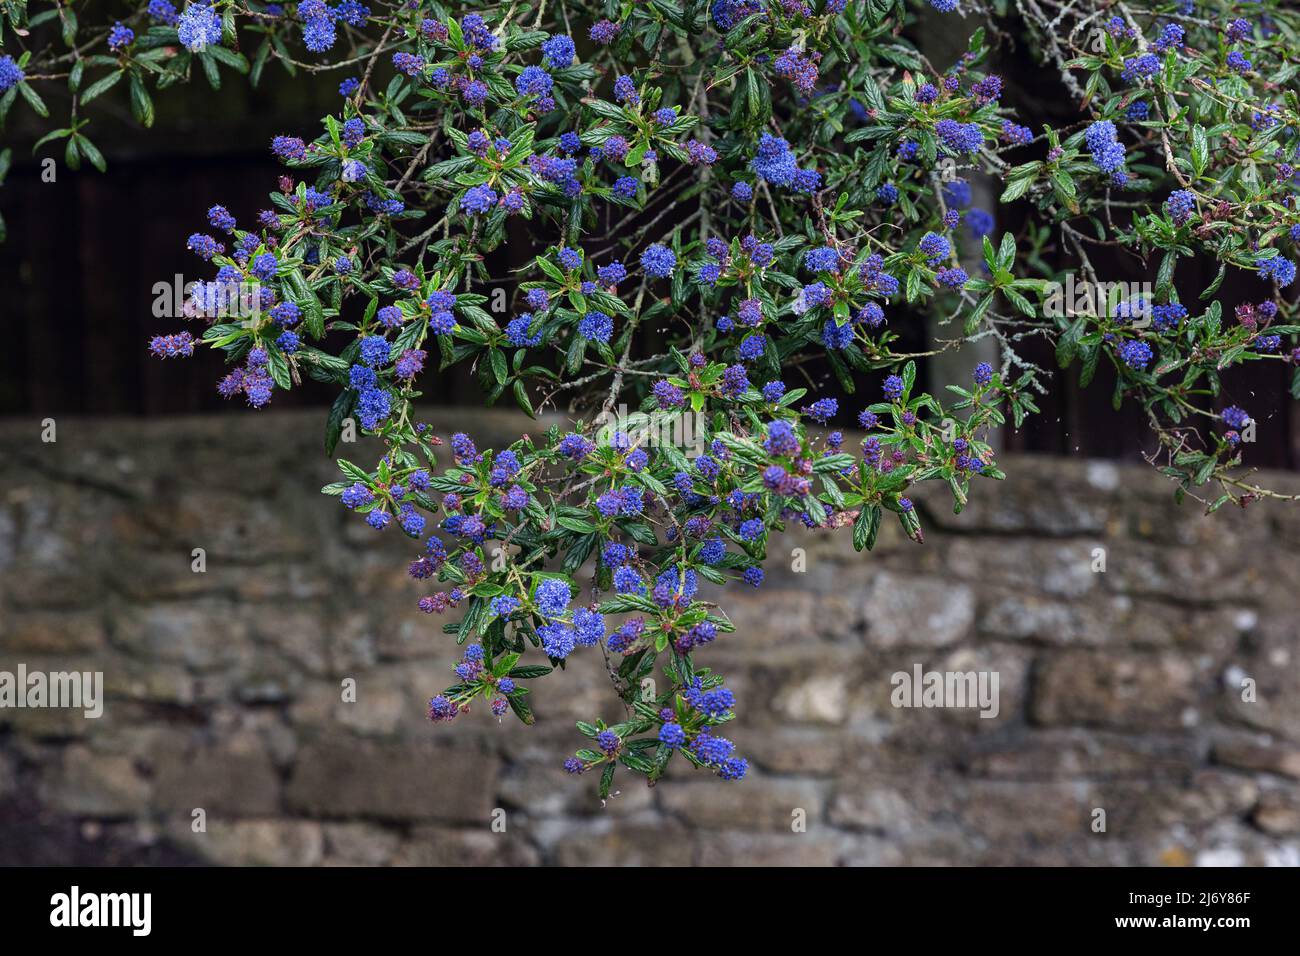 Bright blue flowers of a Ceanothus tree in Springtime in a British garden Stock Photo